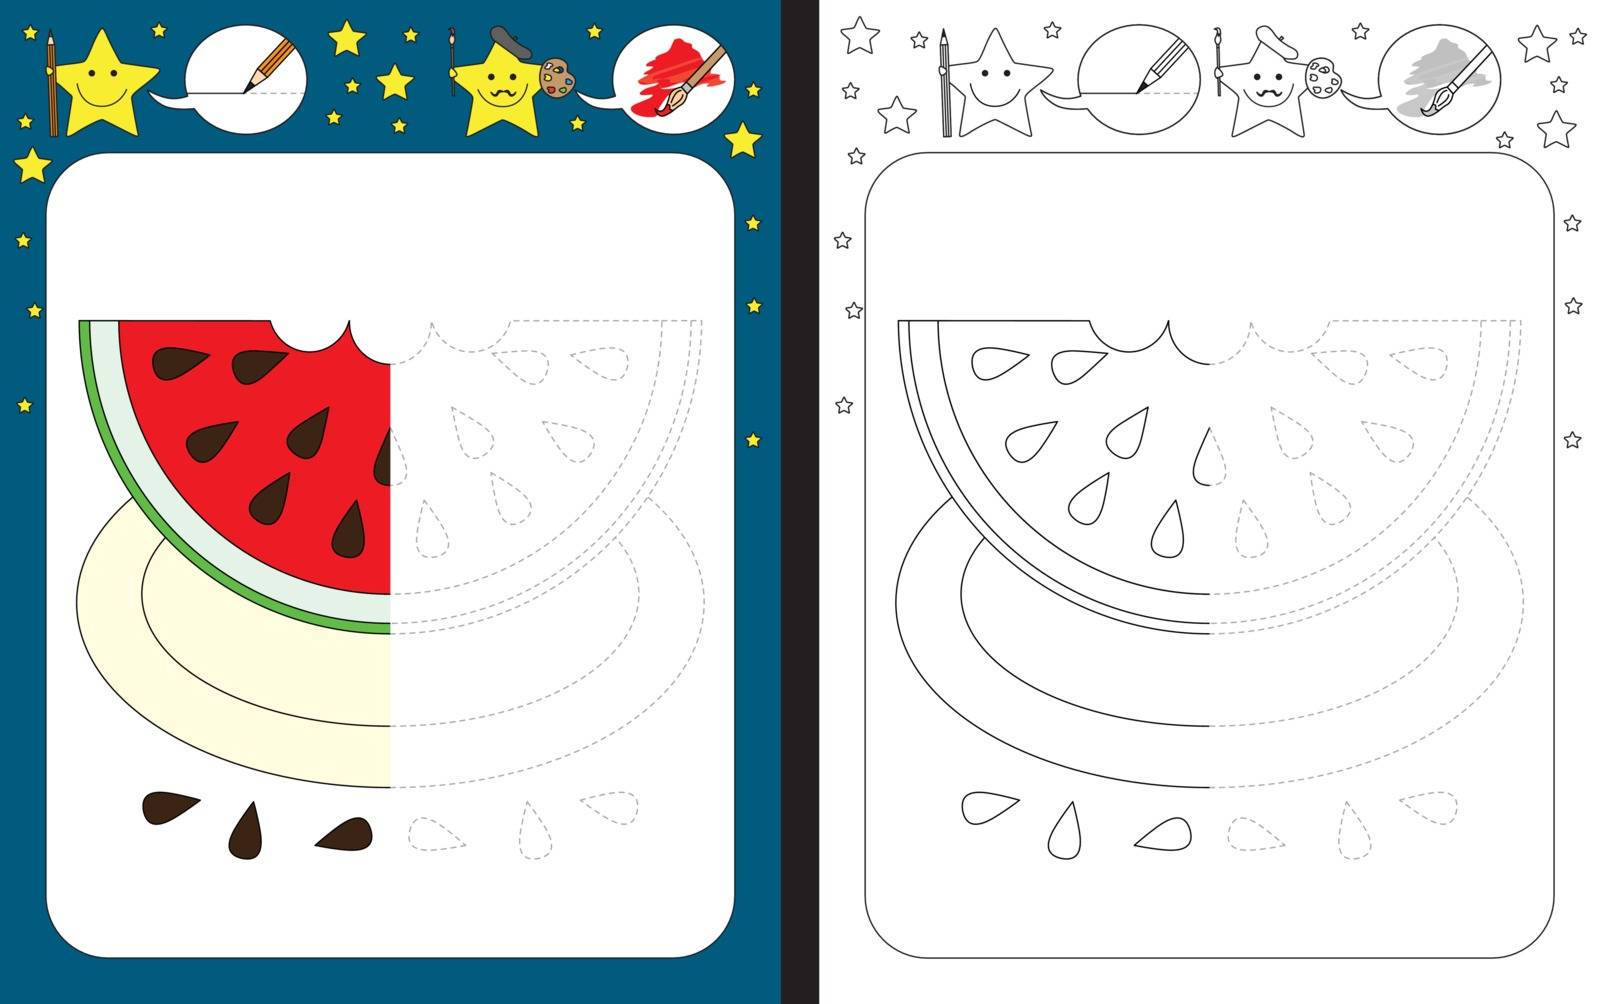 Preschool worksheet for practicing fine motor skills - tracing dashed lines - finish the illustration of watermelon slice on a plate